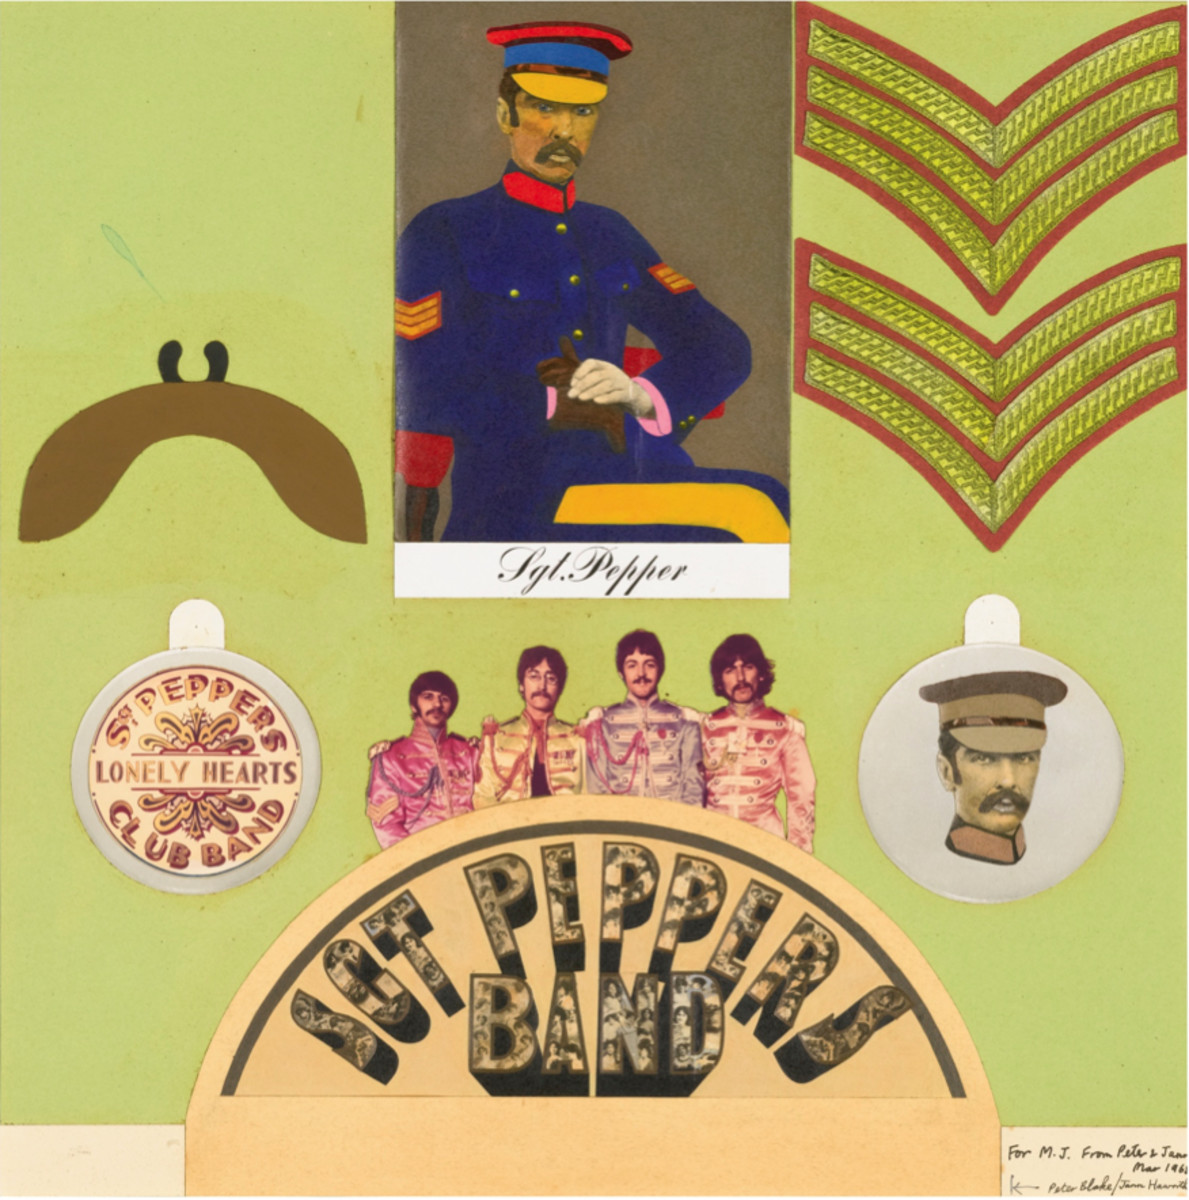 Sgt Pepper insert artwork by Peter Blake and Jann Haworth courtesy Sotheby's